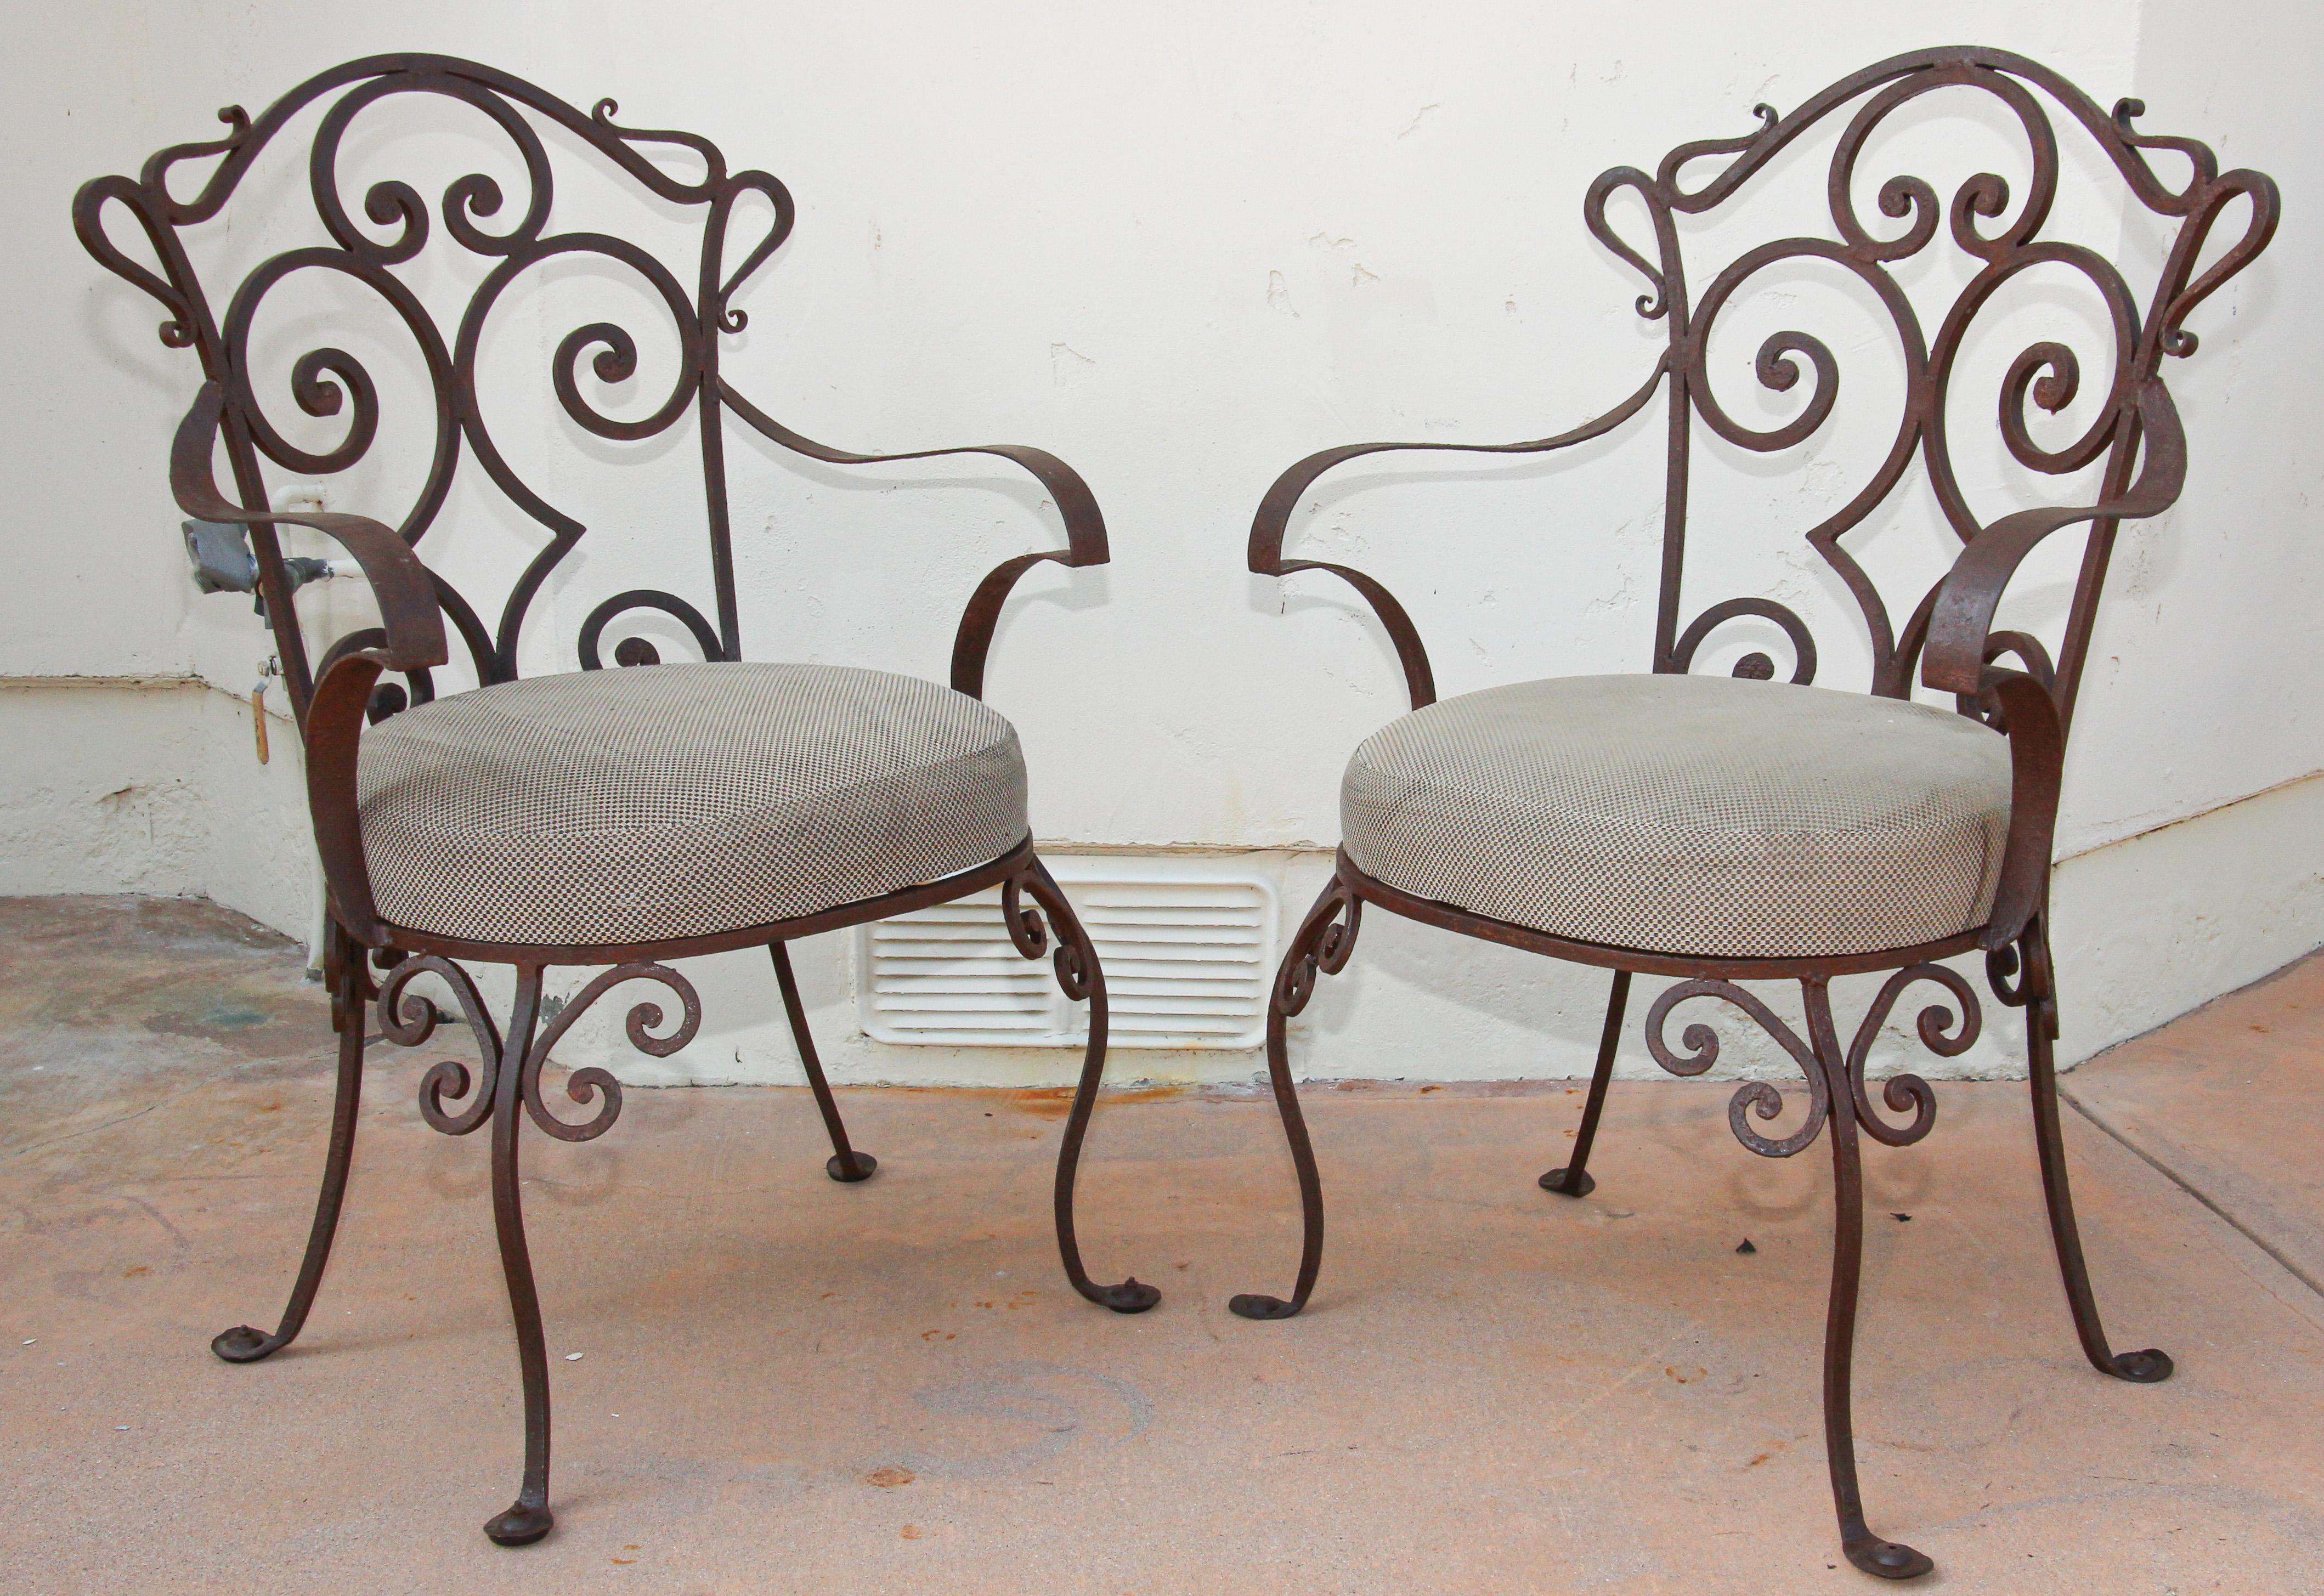 Large vintage outdoor wrought iron set of 6 armchairs in Jean-Charles Moreux Style,
They come with upholstered custom cushion seat.
Hand-wrought iron and probably made circa 1950, no previous visual repairs.
Seat cushions are old but quite usable